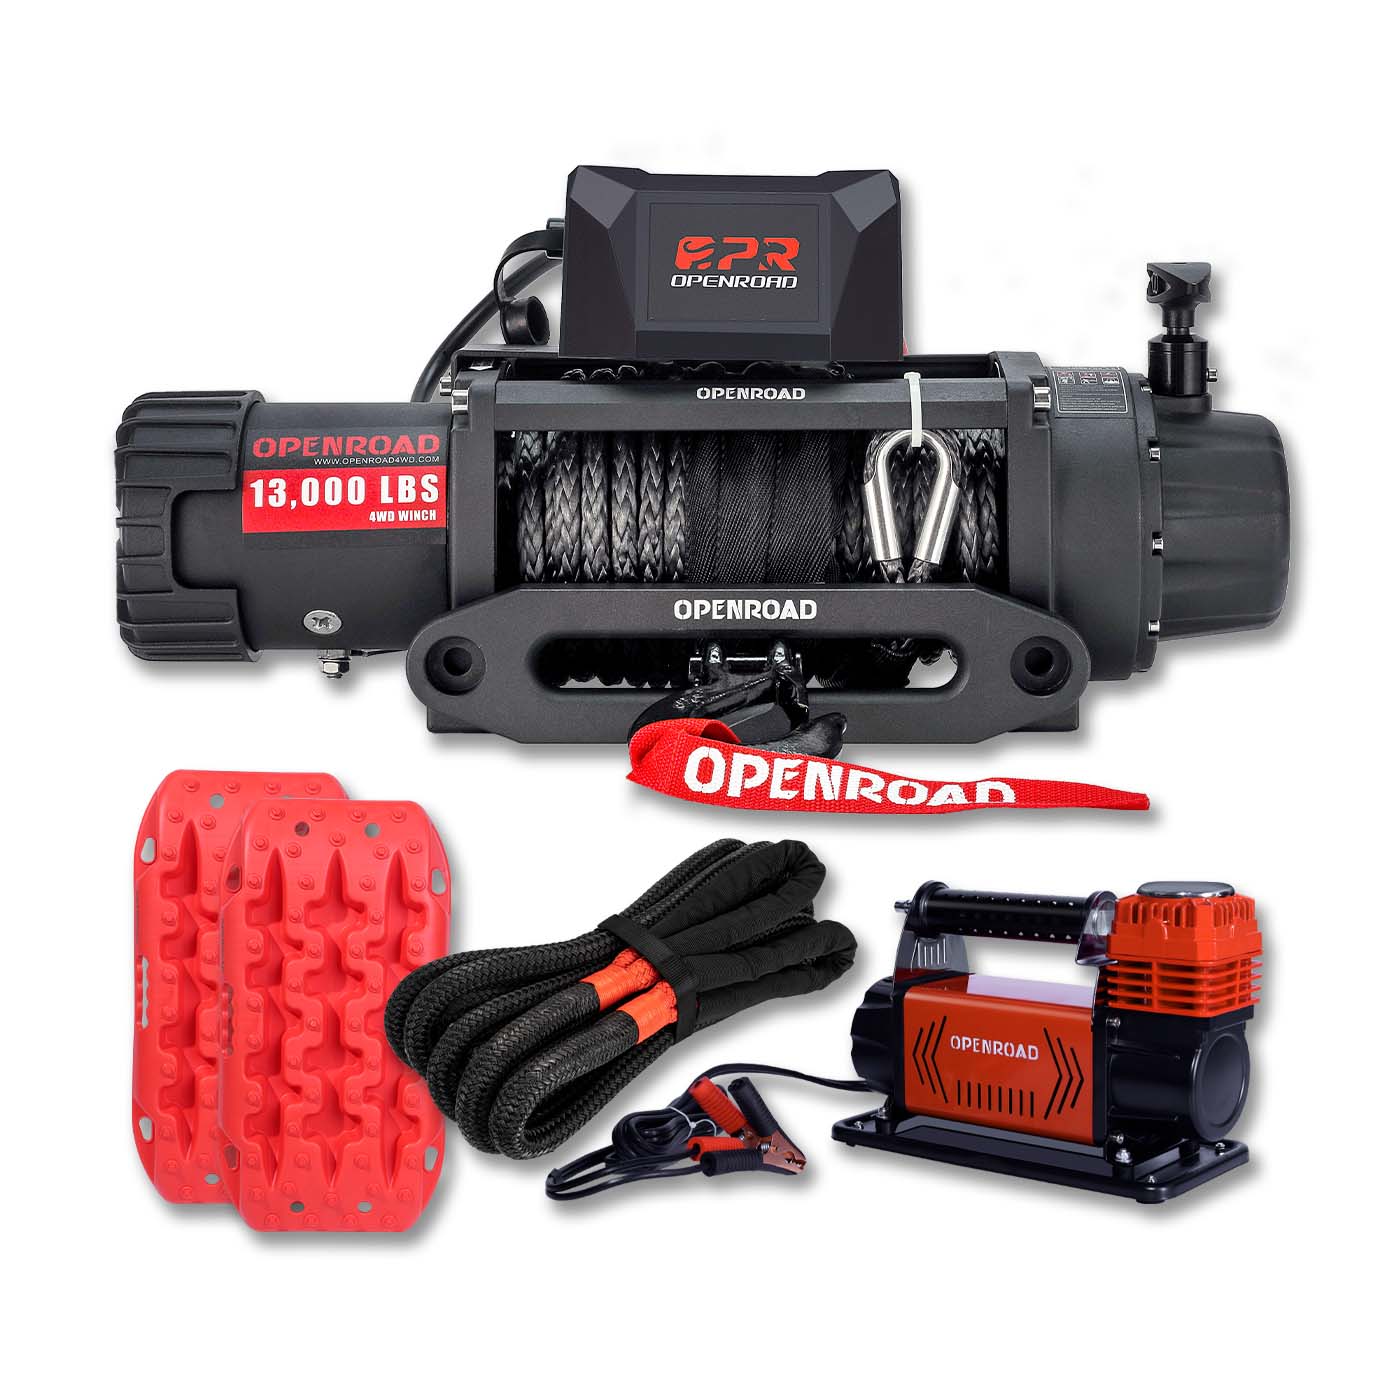 13000lbs Electric Winch +Traction Boards+Tow Rope (25,000lbs)+5.65 CFM air compressor  openroad4wd.com   